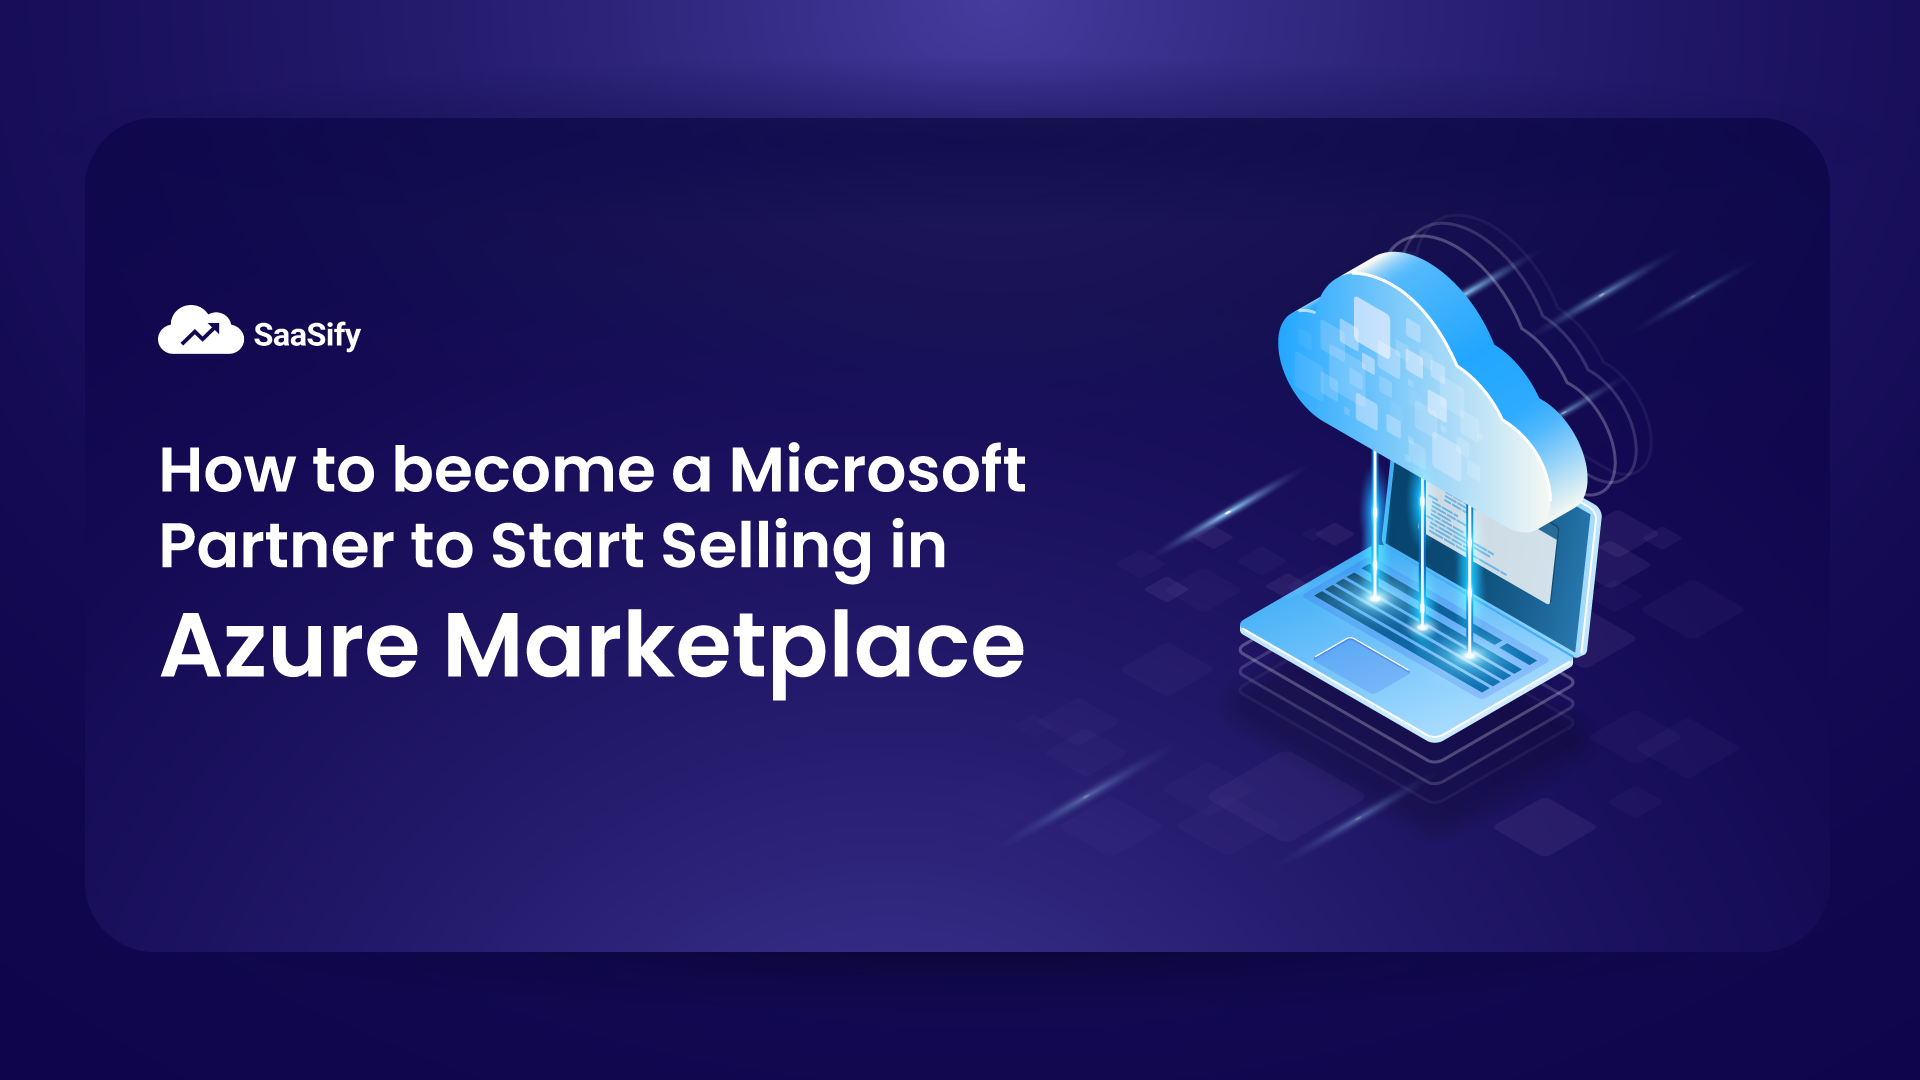 Selling in Azure Marketplace